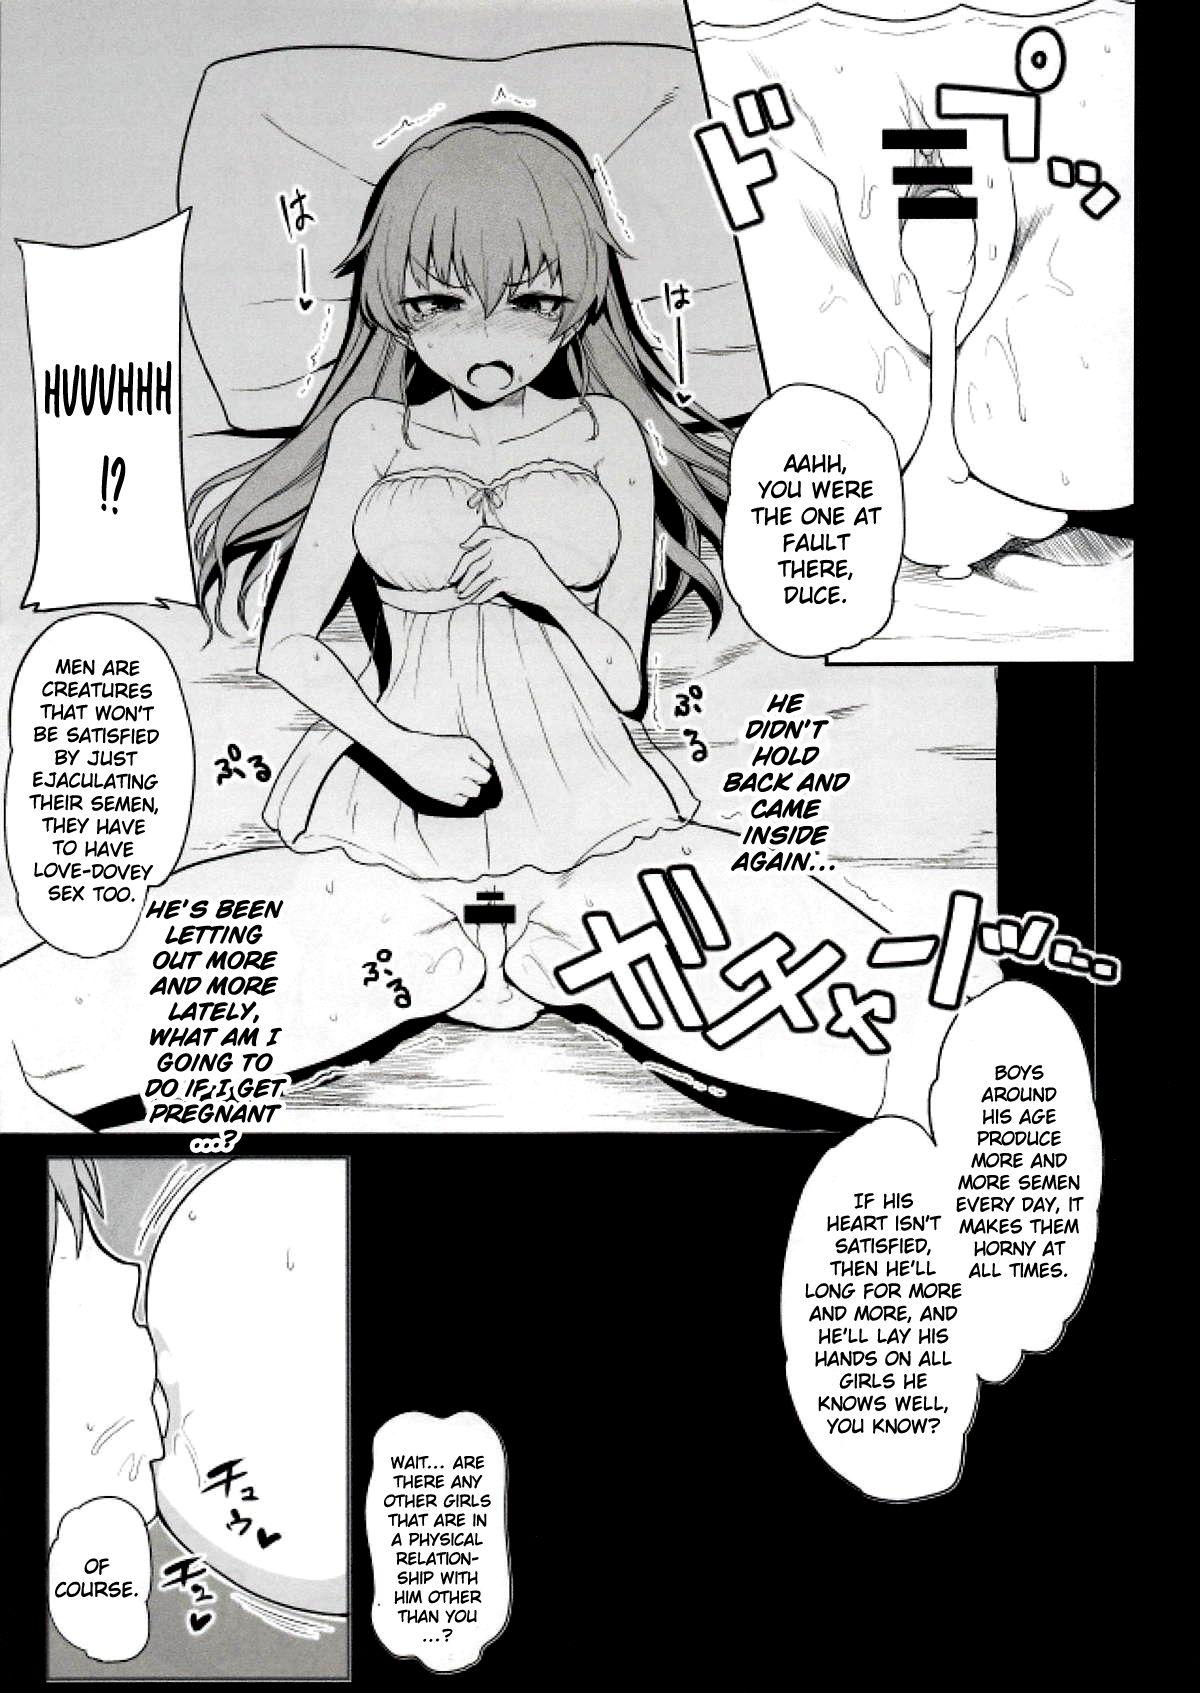 Amateur Sex Raise wa Duce no Otouto ni Naritai | I Want To Become Duce's Little Brother In The Future! - Girls und panzer Cei - Page 5